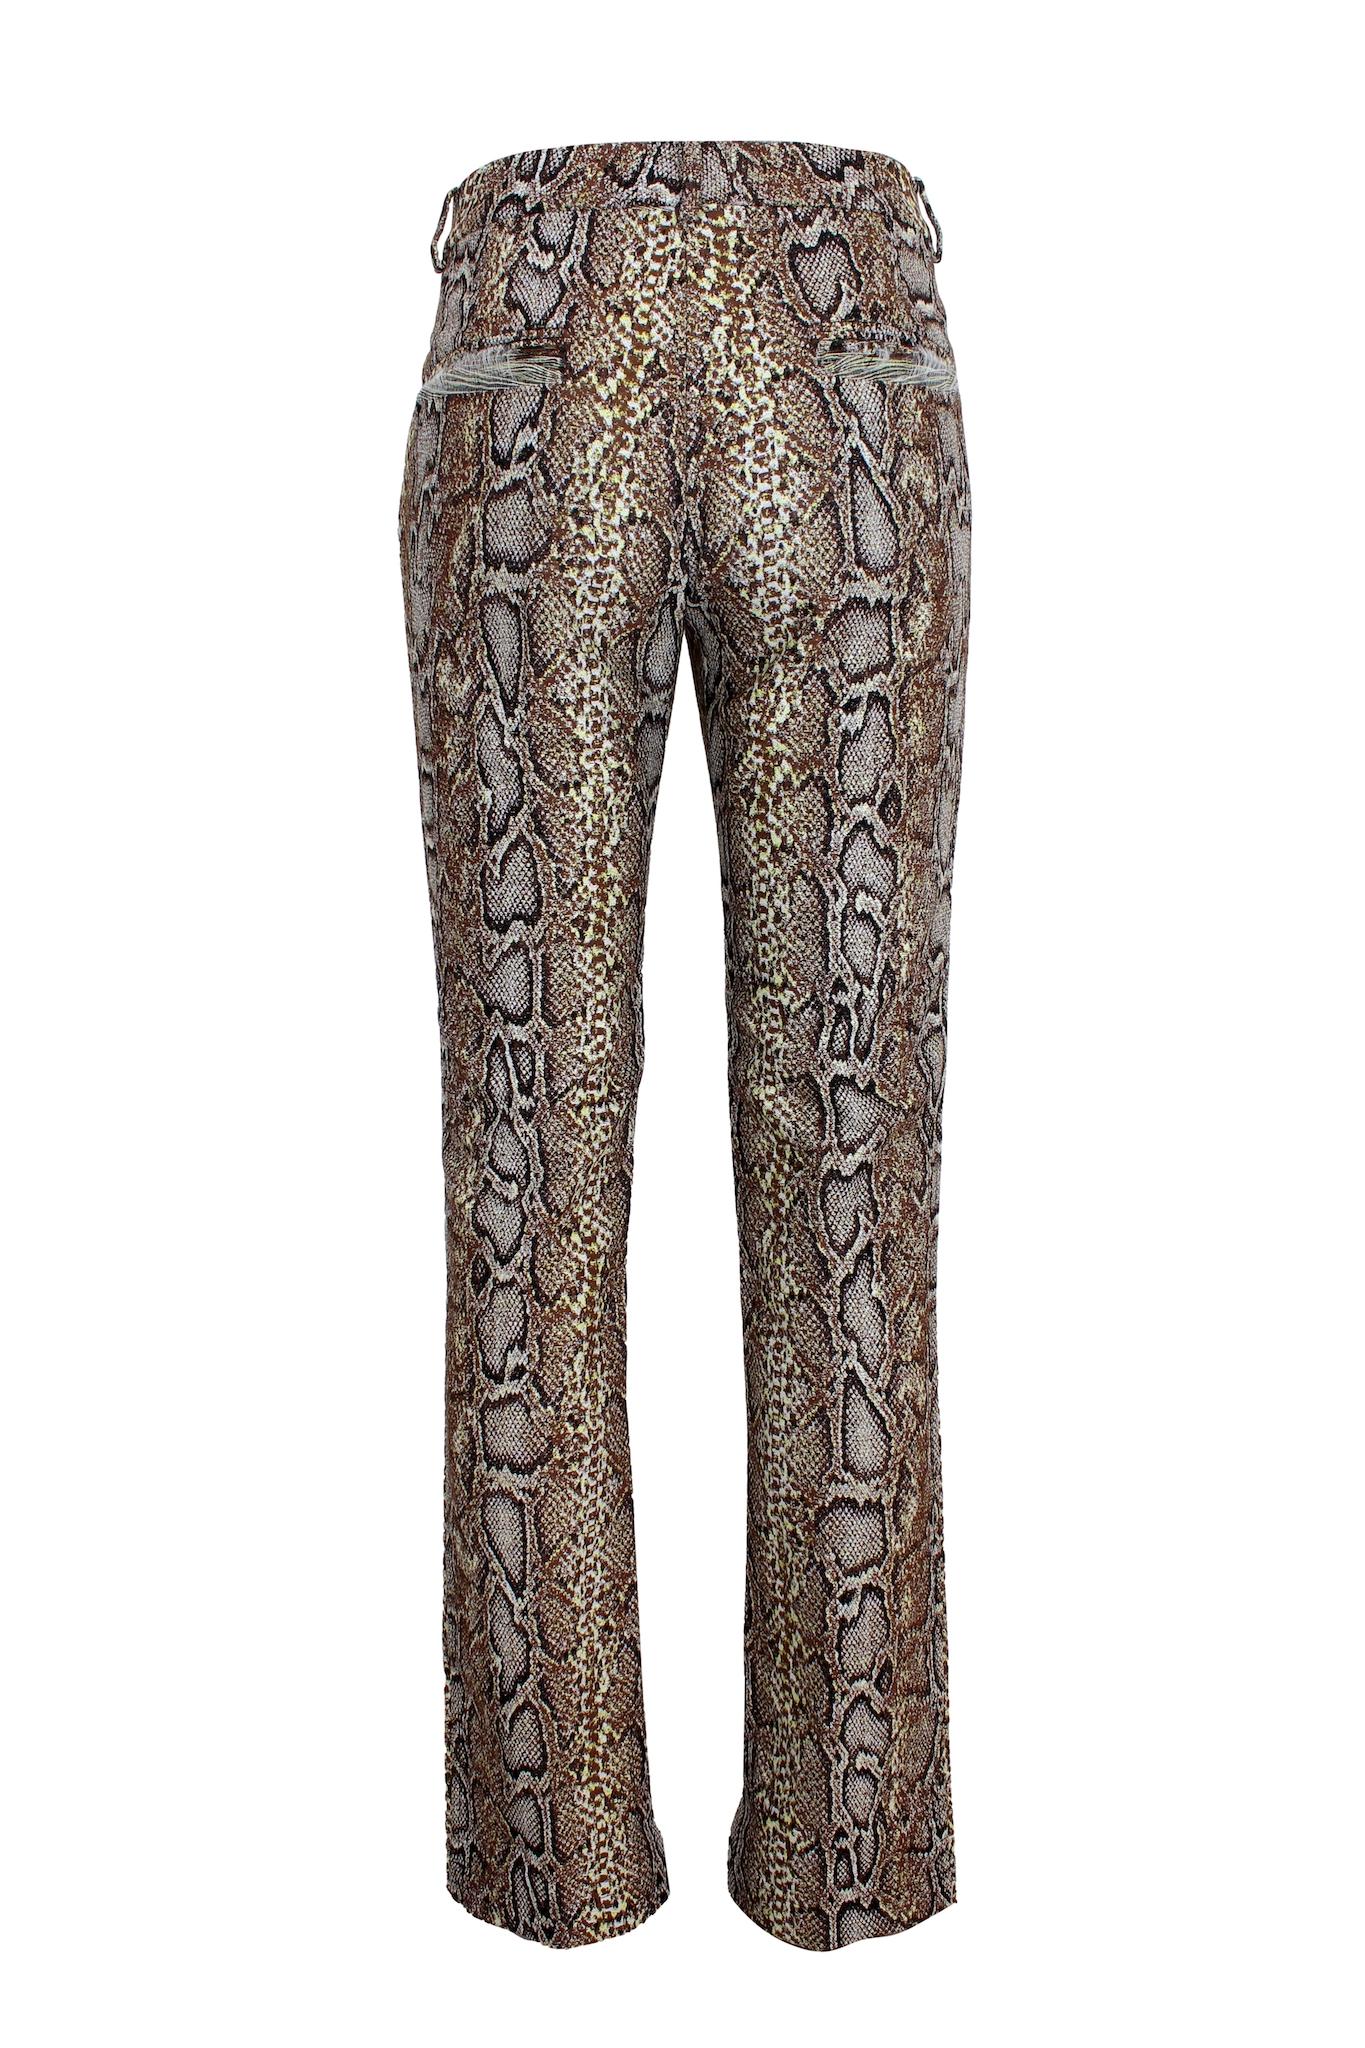 Victoria Beckham 2000s animal print trousers. Brown and yellow trousers, python print pattern. Zipper and button closure in 100% horn. Particularity in the back pockets with raw cut. Fabric 89% cotton, 6% polyamide, 5% elastane. Made in